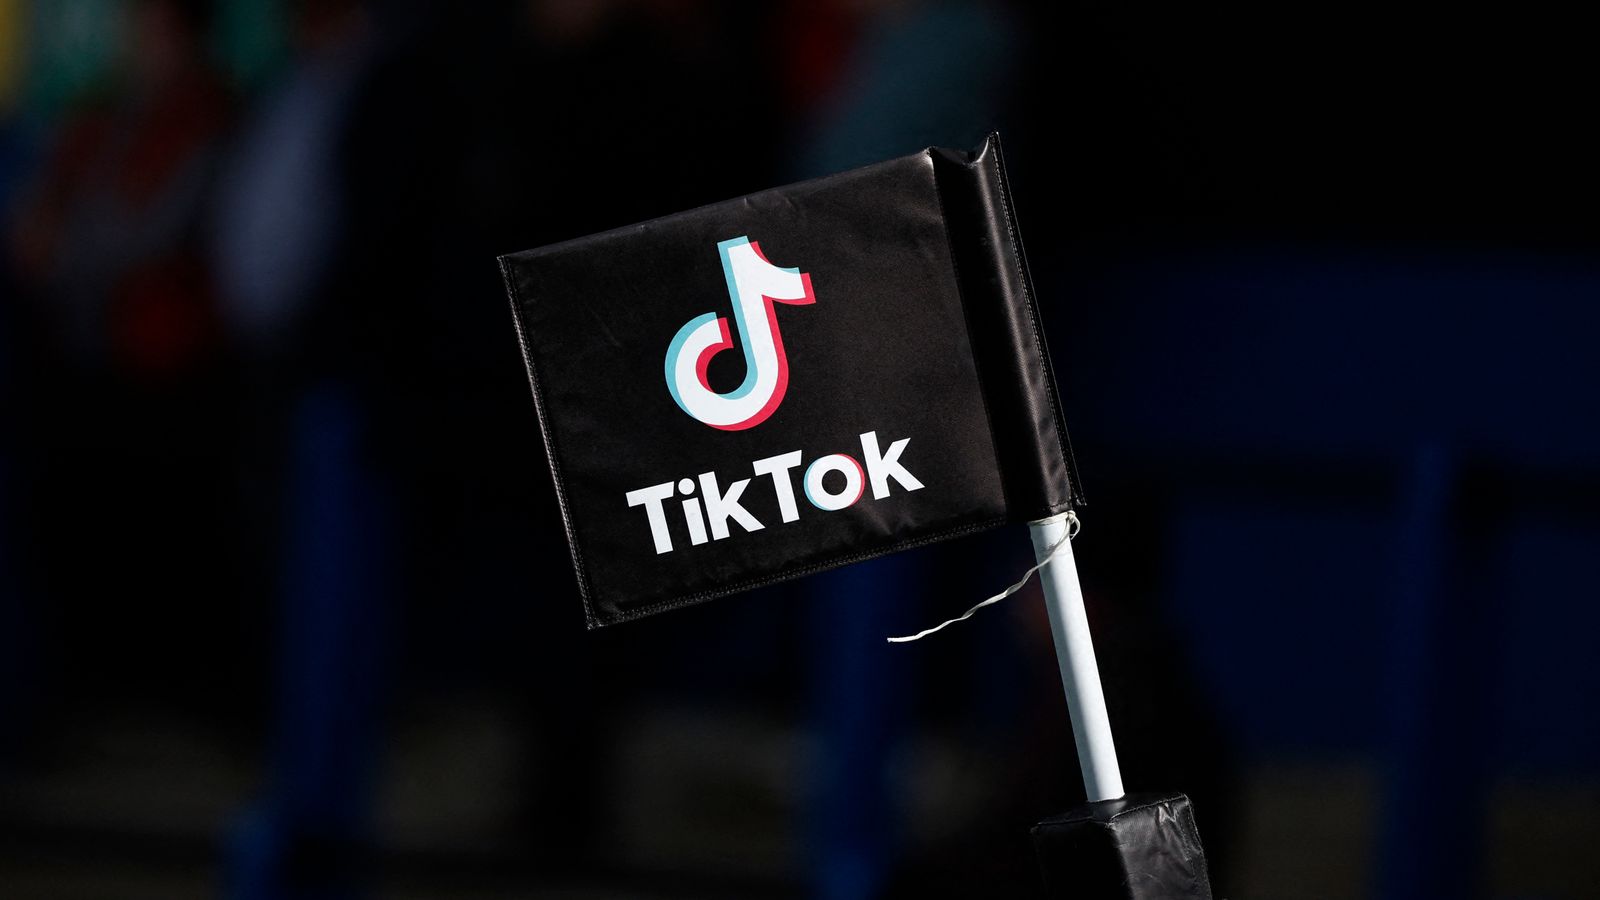 TikTok's US future in doubt as House demands end to China ownership